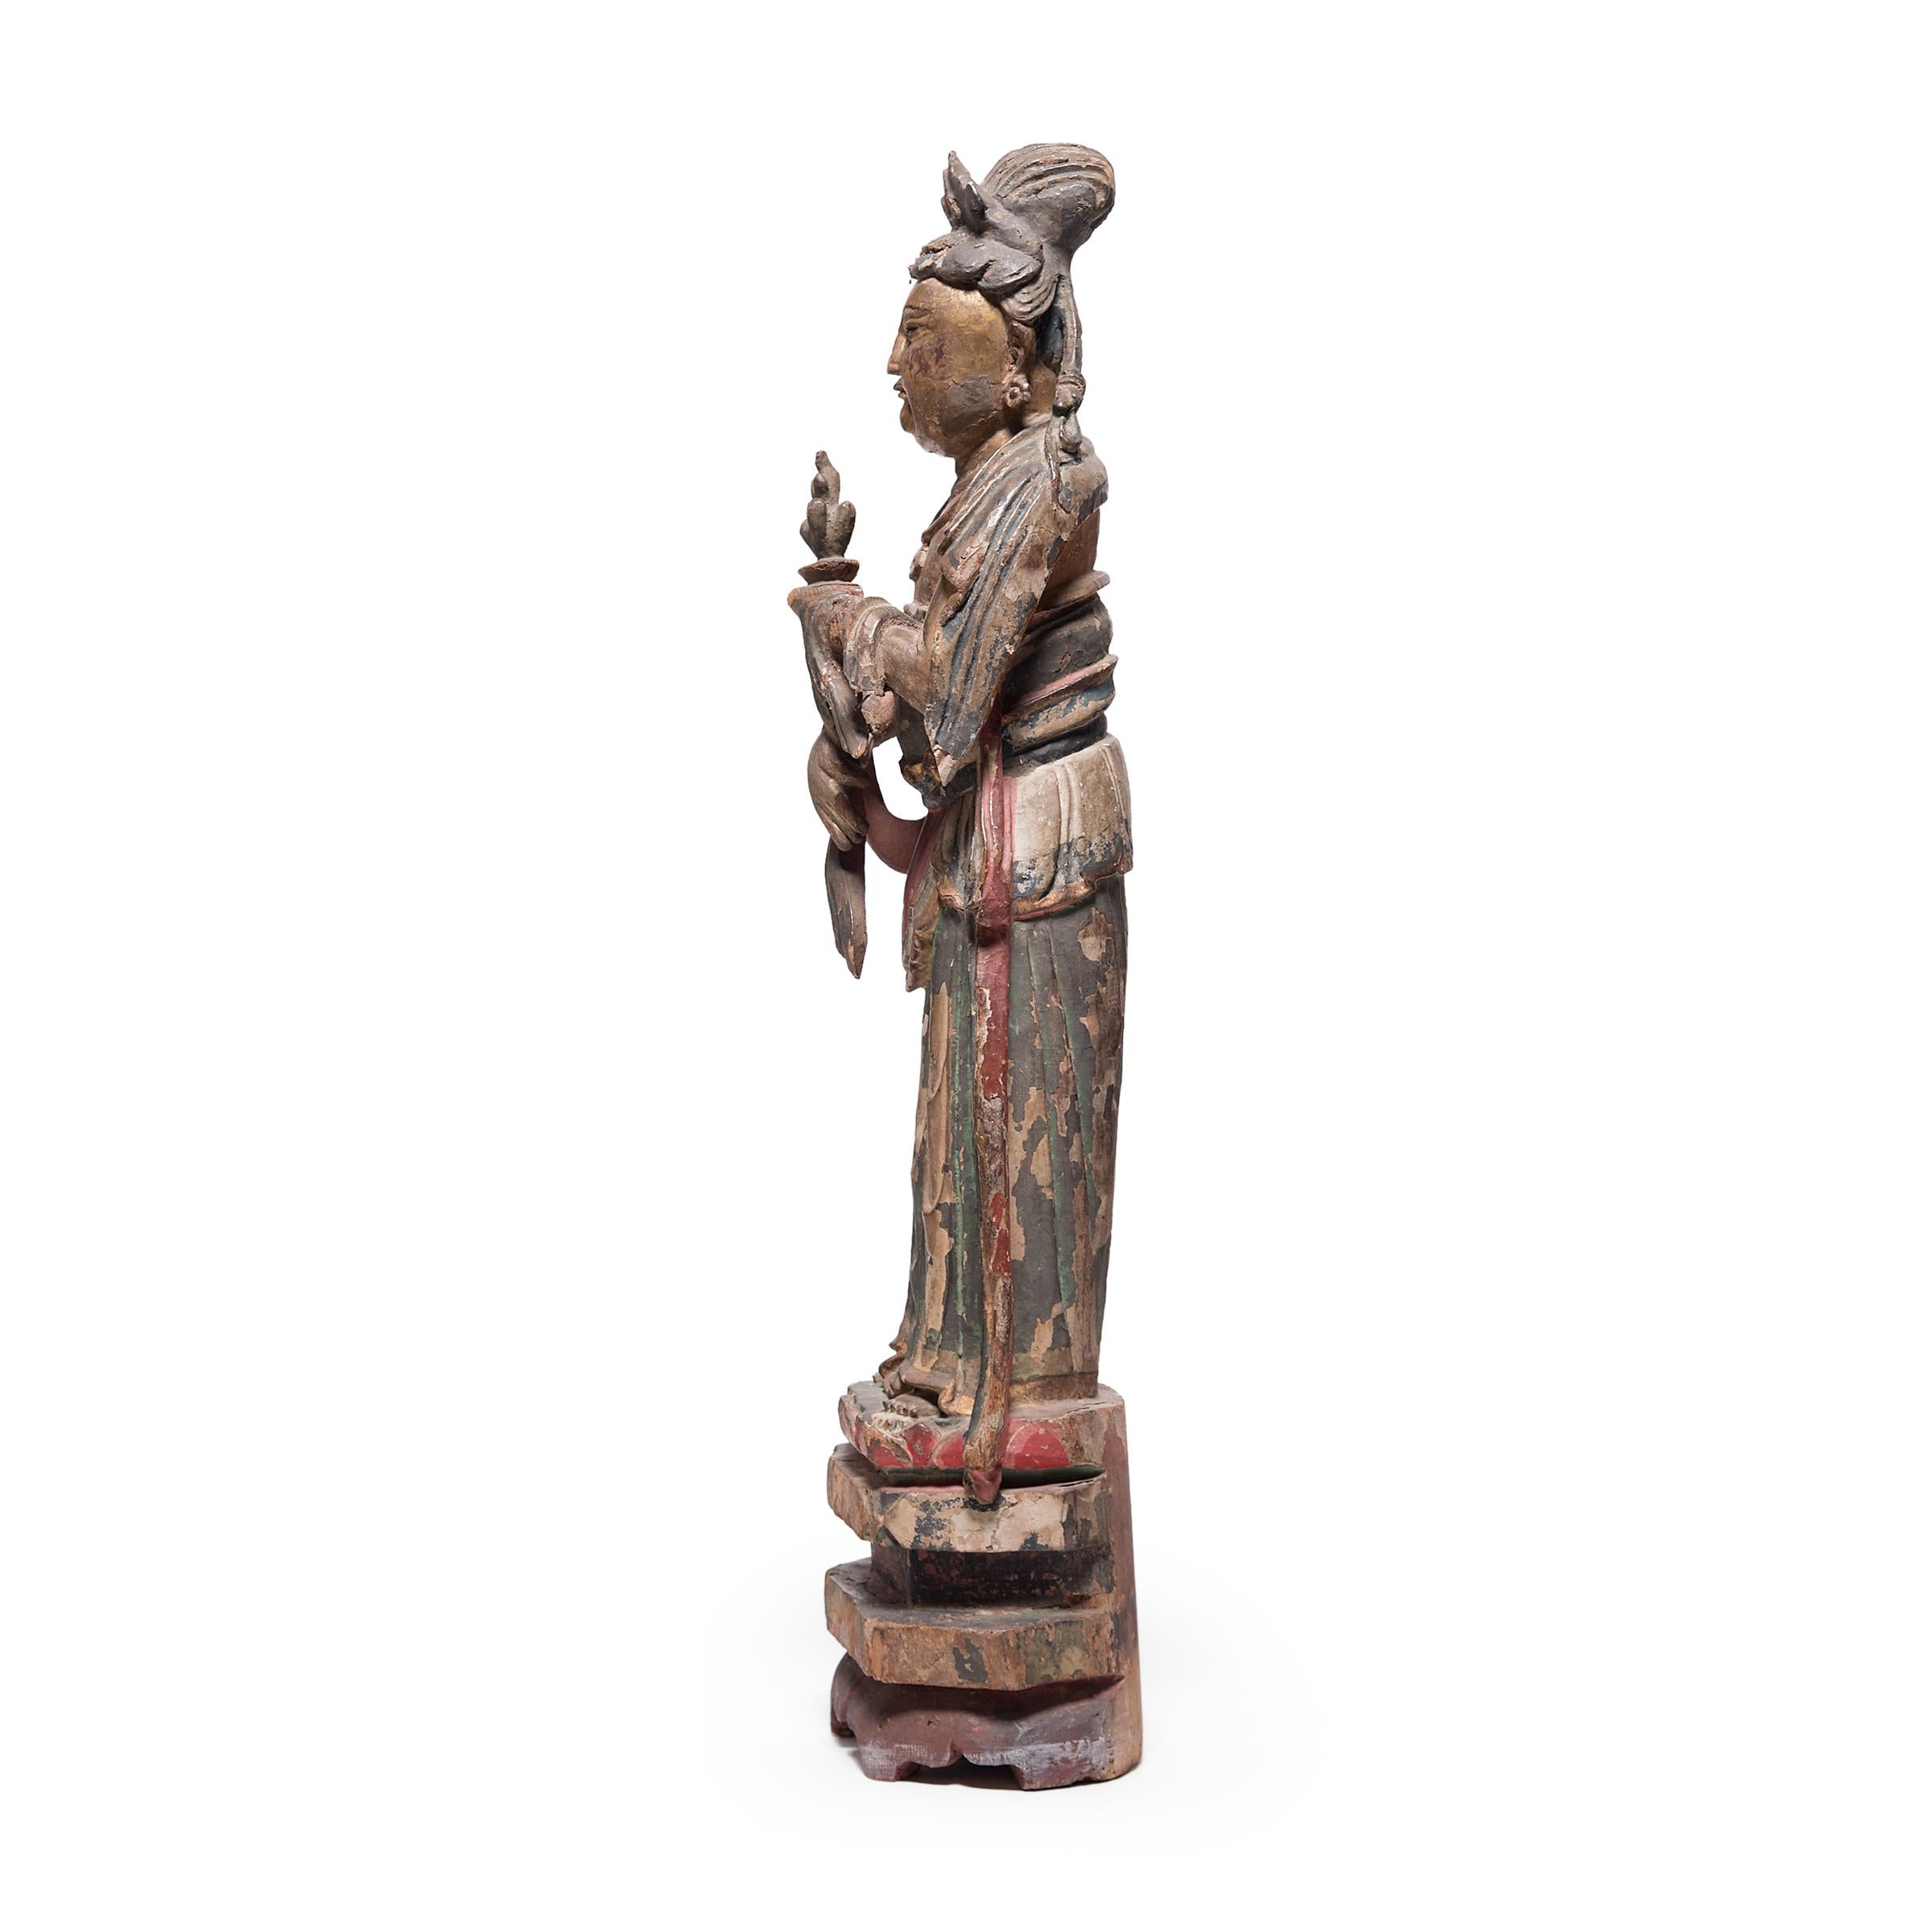 As the embodiment of compassion, Guanyin is the most beloved enlightened being in China. Known as the Goddess of Mercy, she is the female bodhisattva form taken by Avalokitesvara in eastern Buddhism and is instantly available to all who call upon